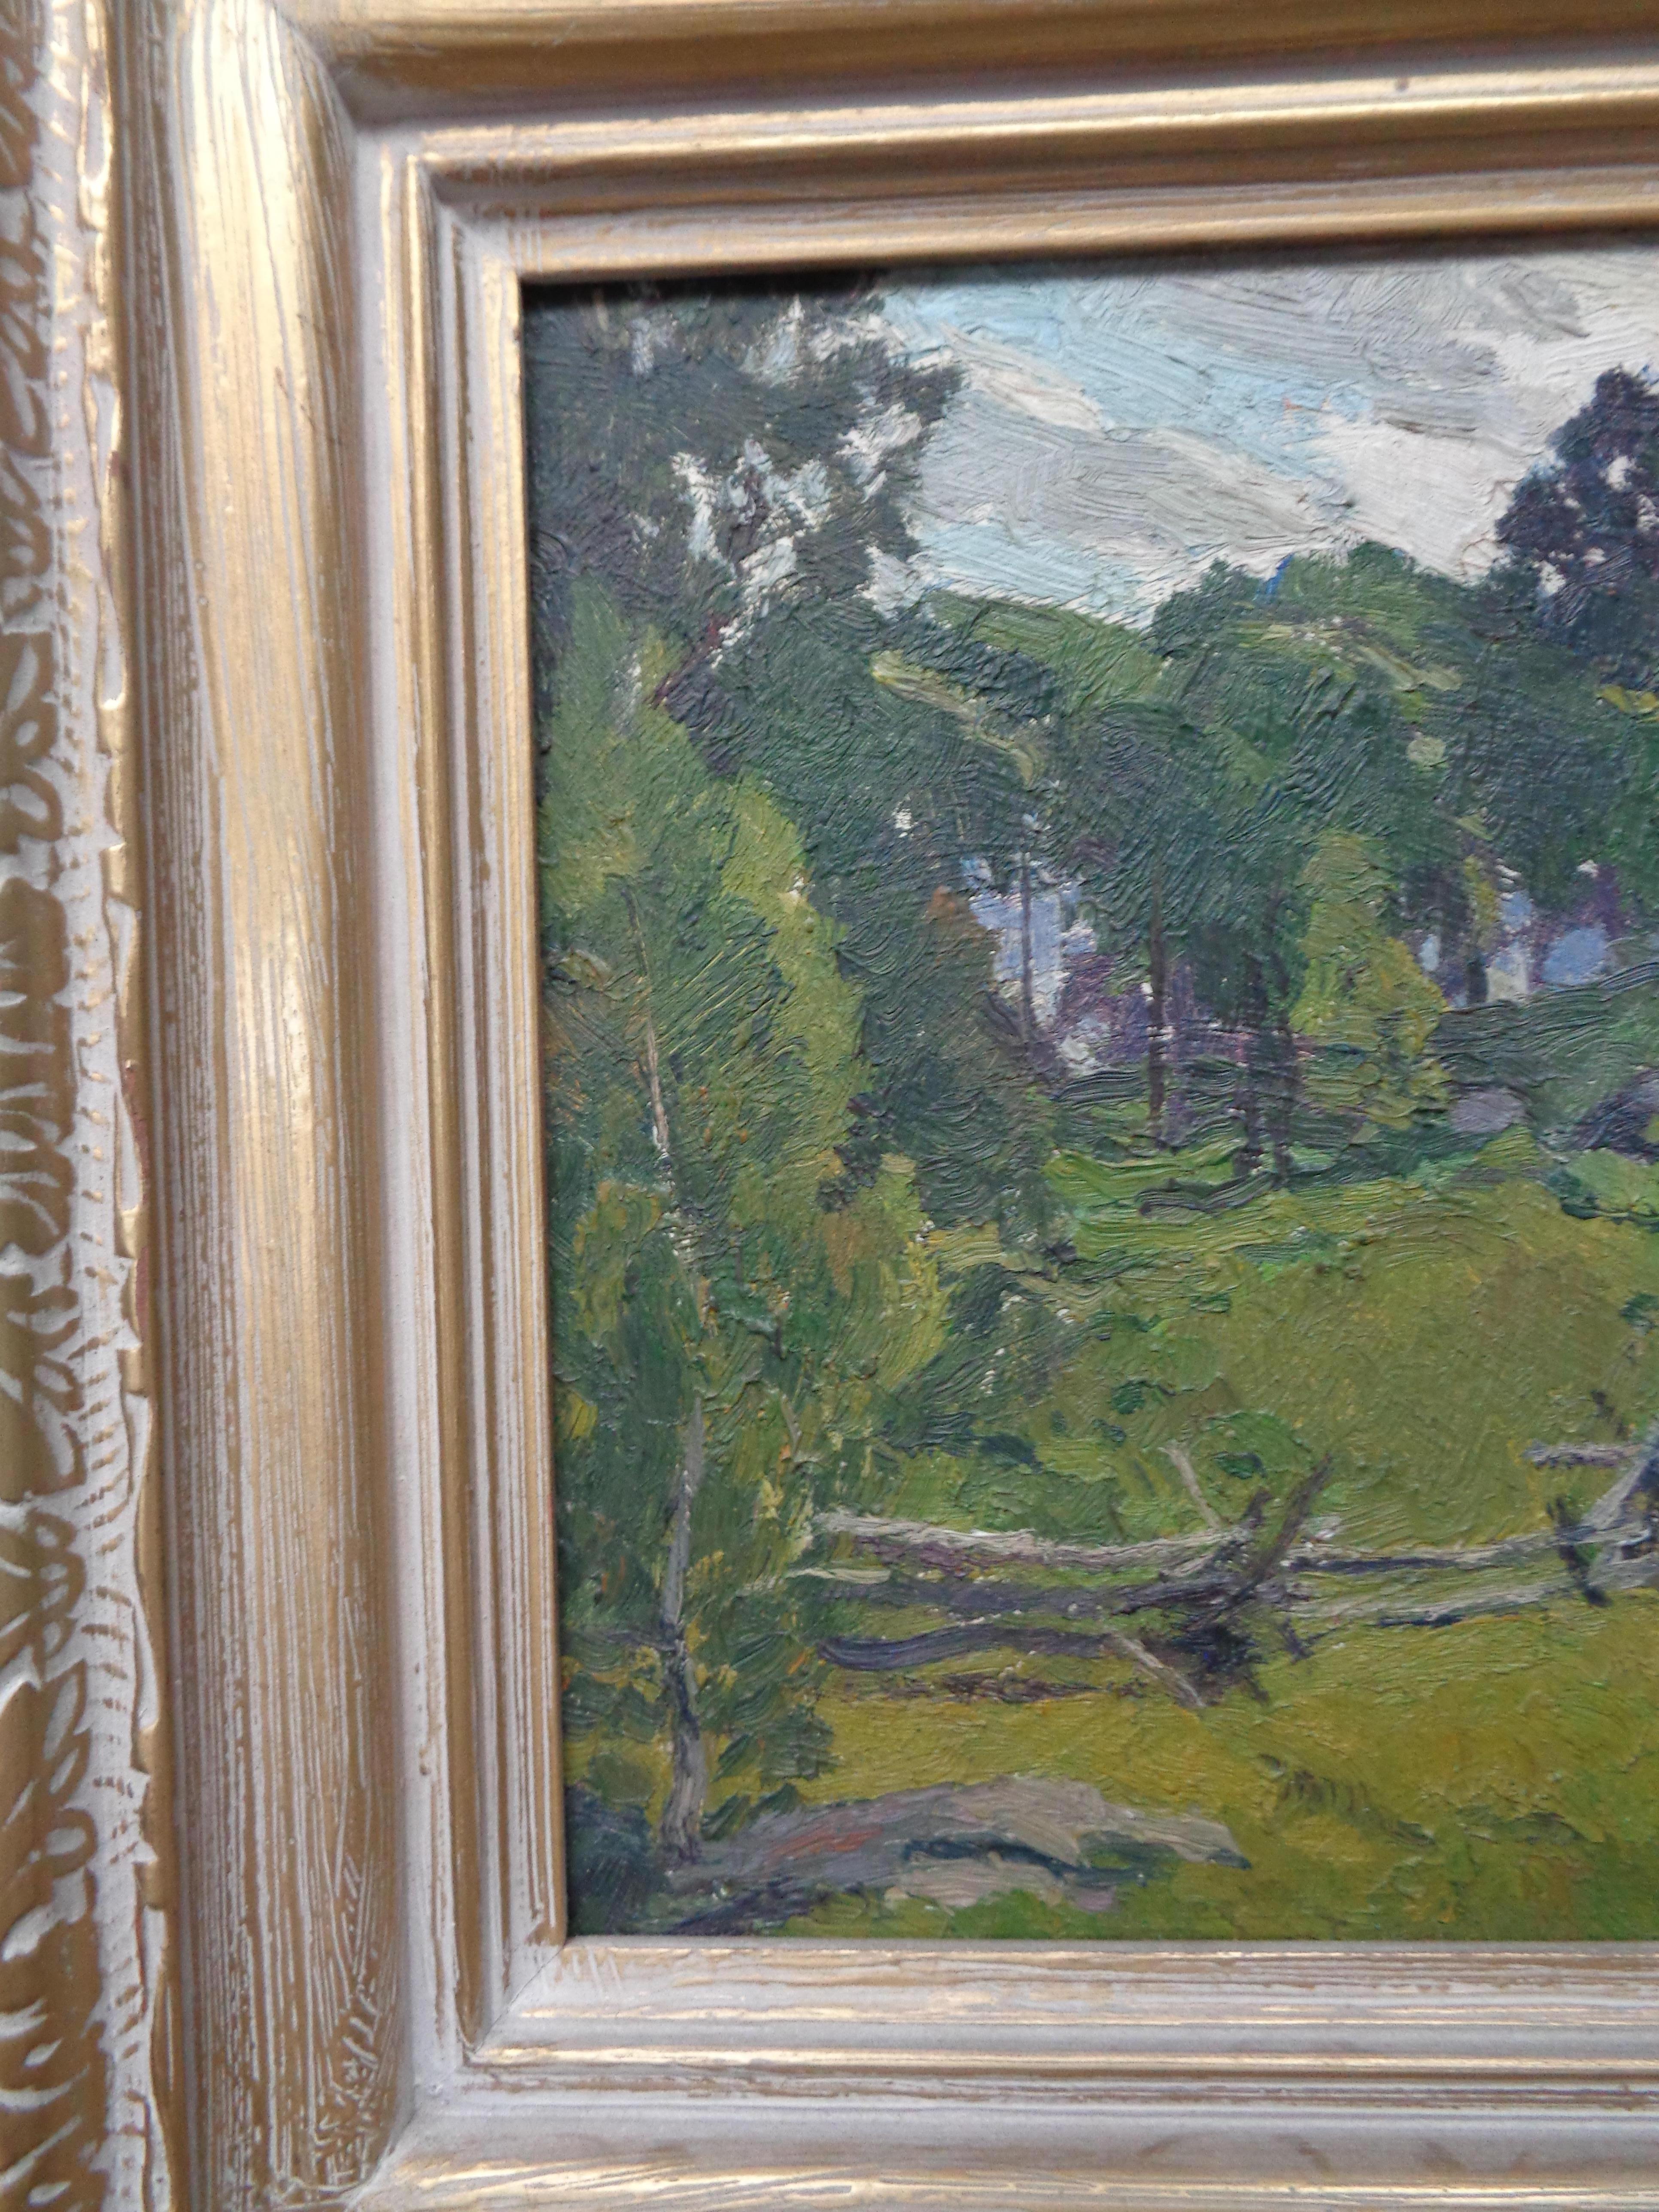 James Goodwin McManus (American  1882-1958) CT
oil/panel
Summer landscape with split rails 
signed LR
dated June 22, 1934 verso
8 x 10 image
Biography:
James Goodwin McManus was a noted American painter and considered one of the deans of Connecticut